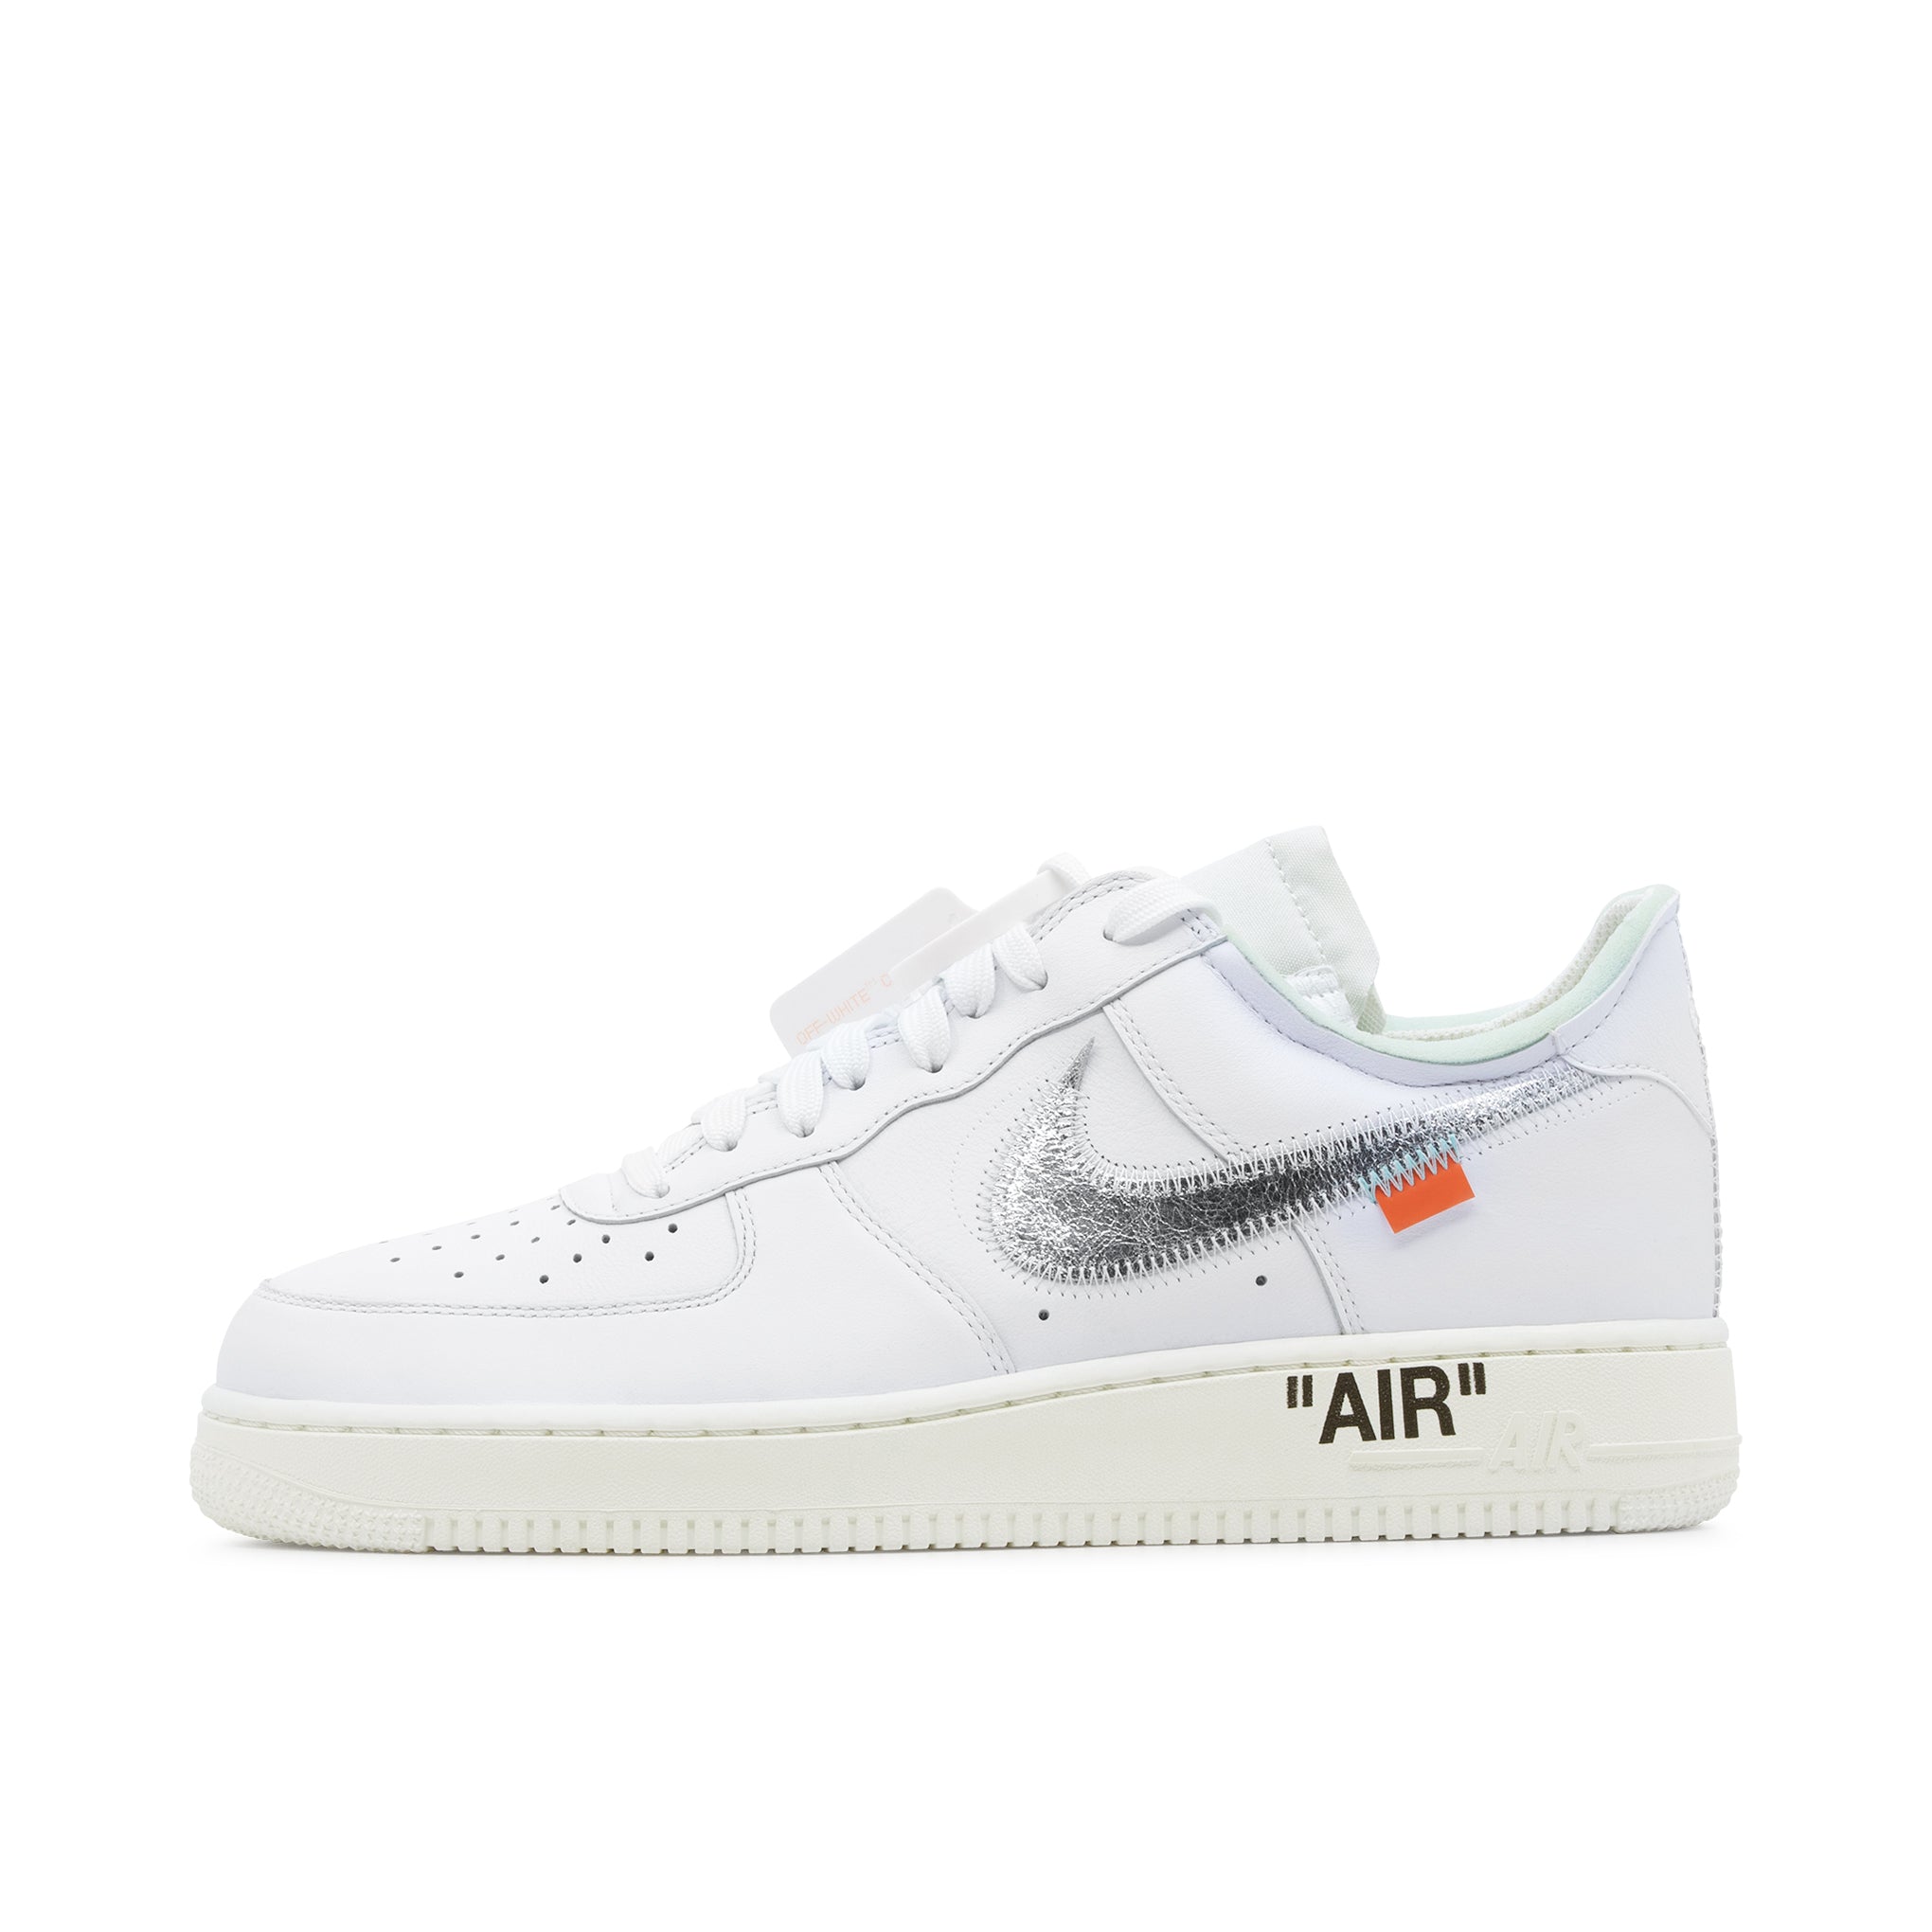 The 'ComplexCon' Off-White x Nike Air Force 1 Low May Be Releasing